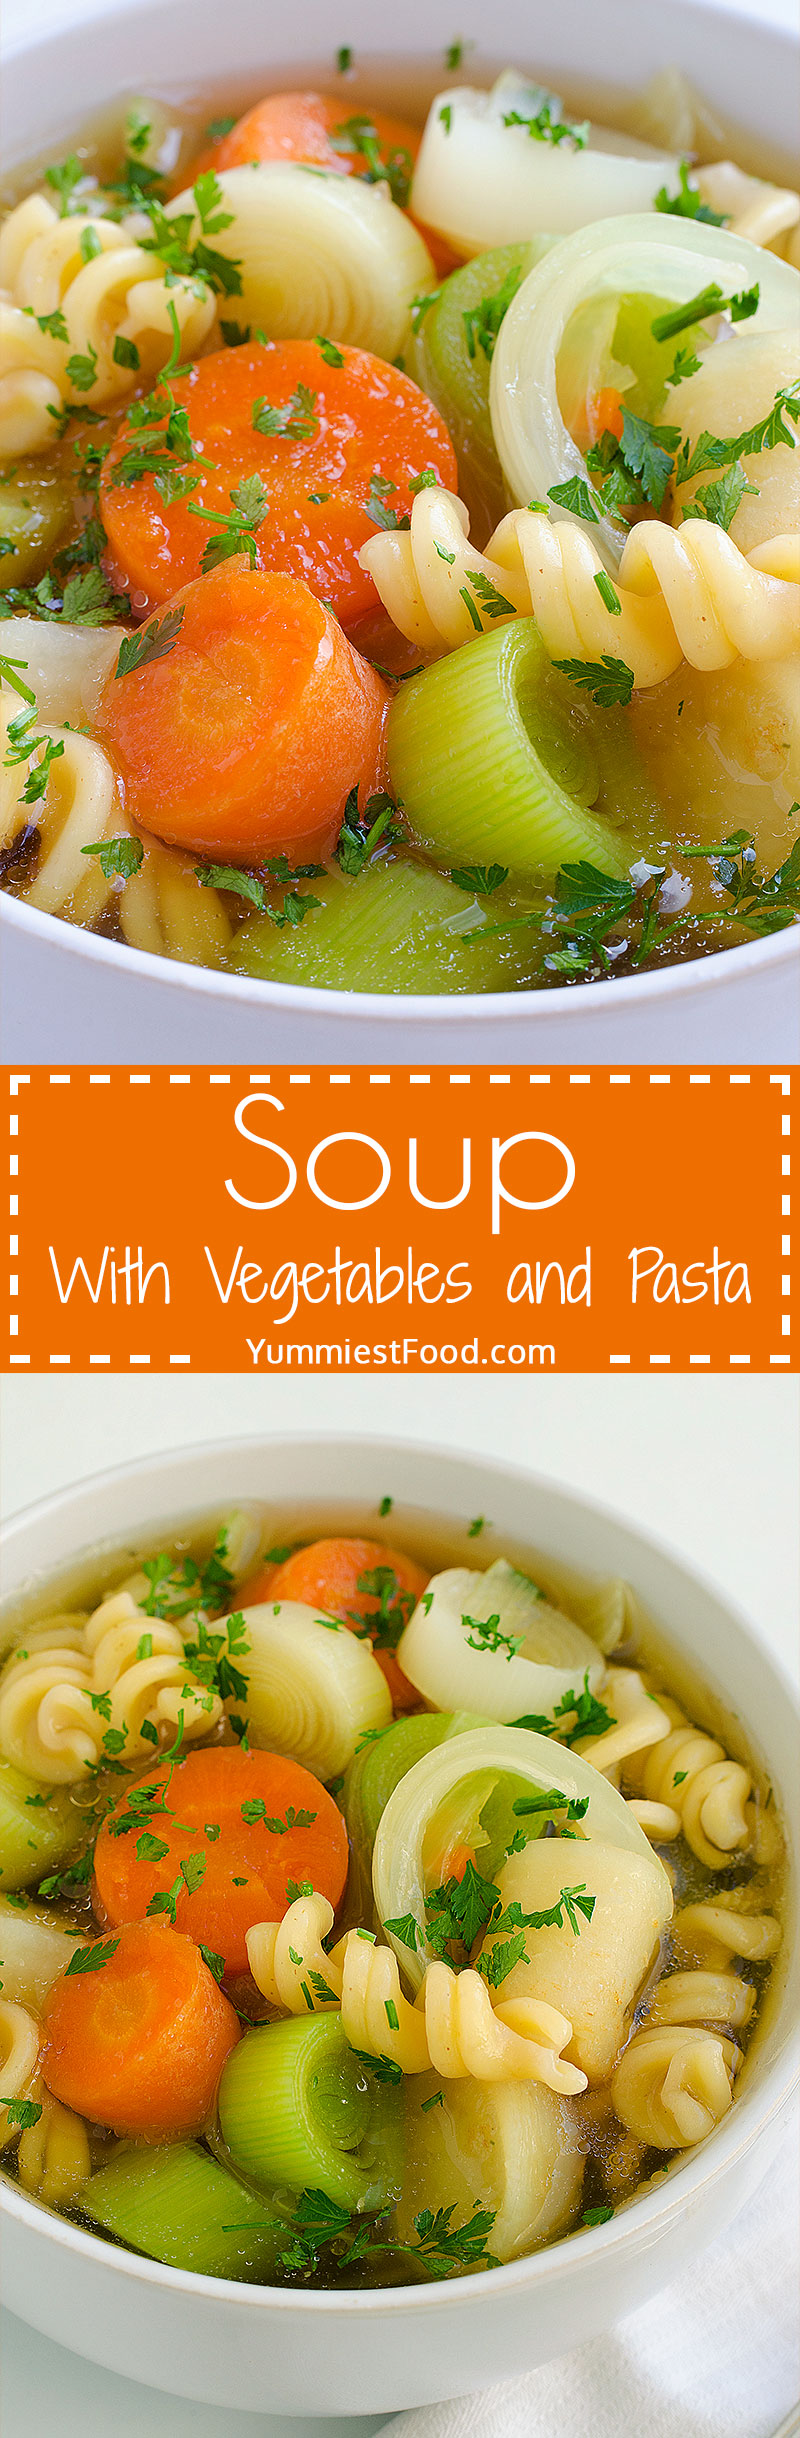 Soup With Vegetables and Pasta - This soup with vegetables and pasta is very healthy and your family is sure to love it from the first bite